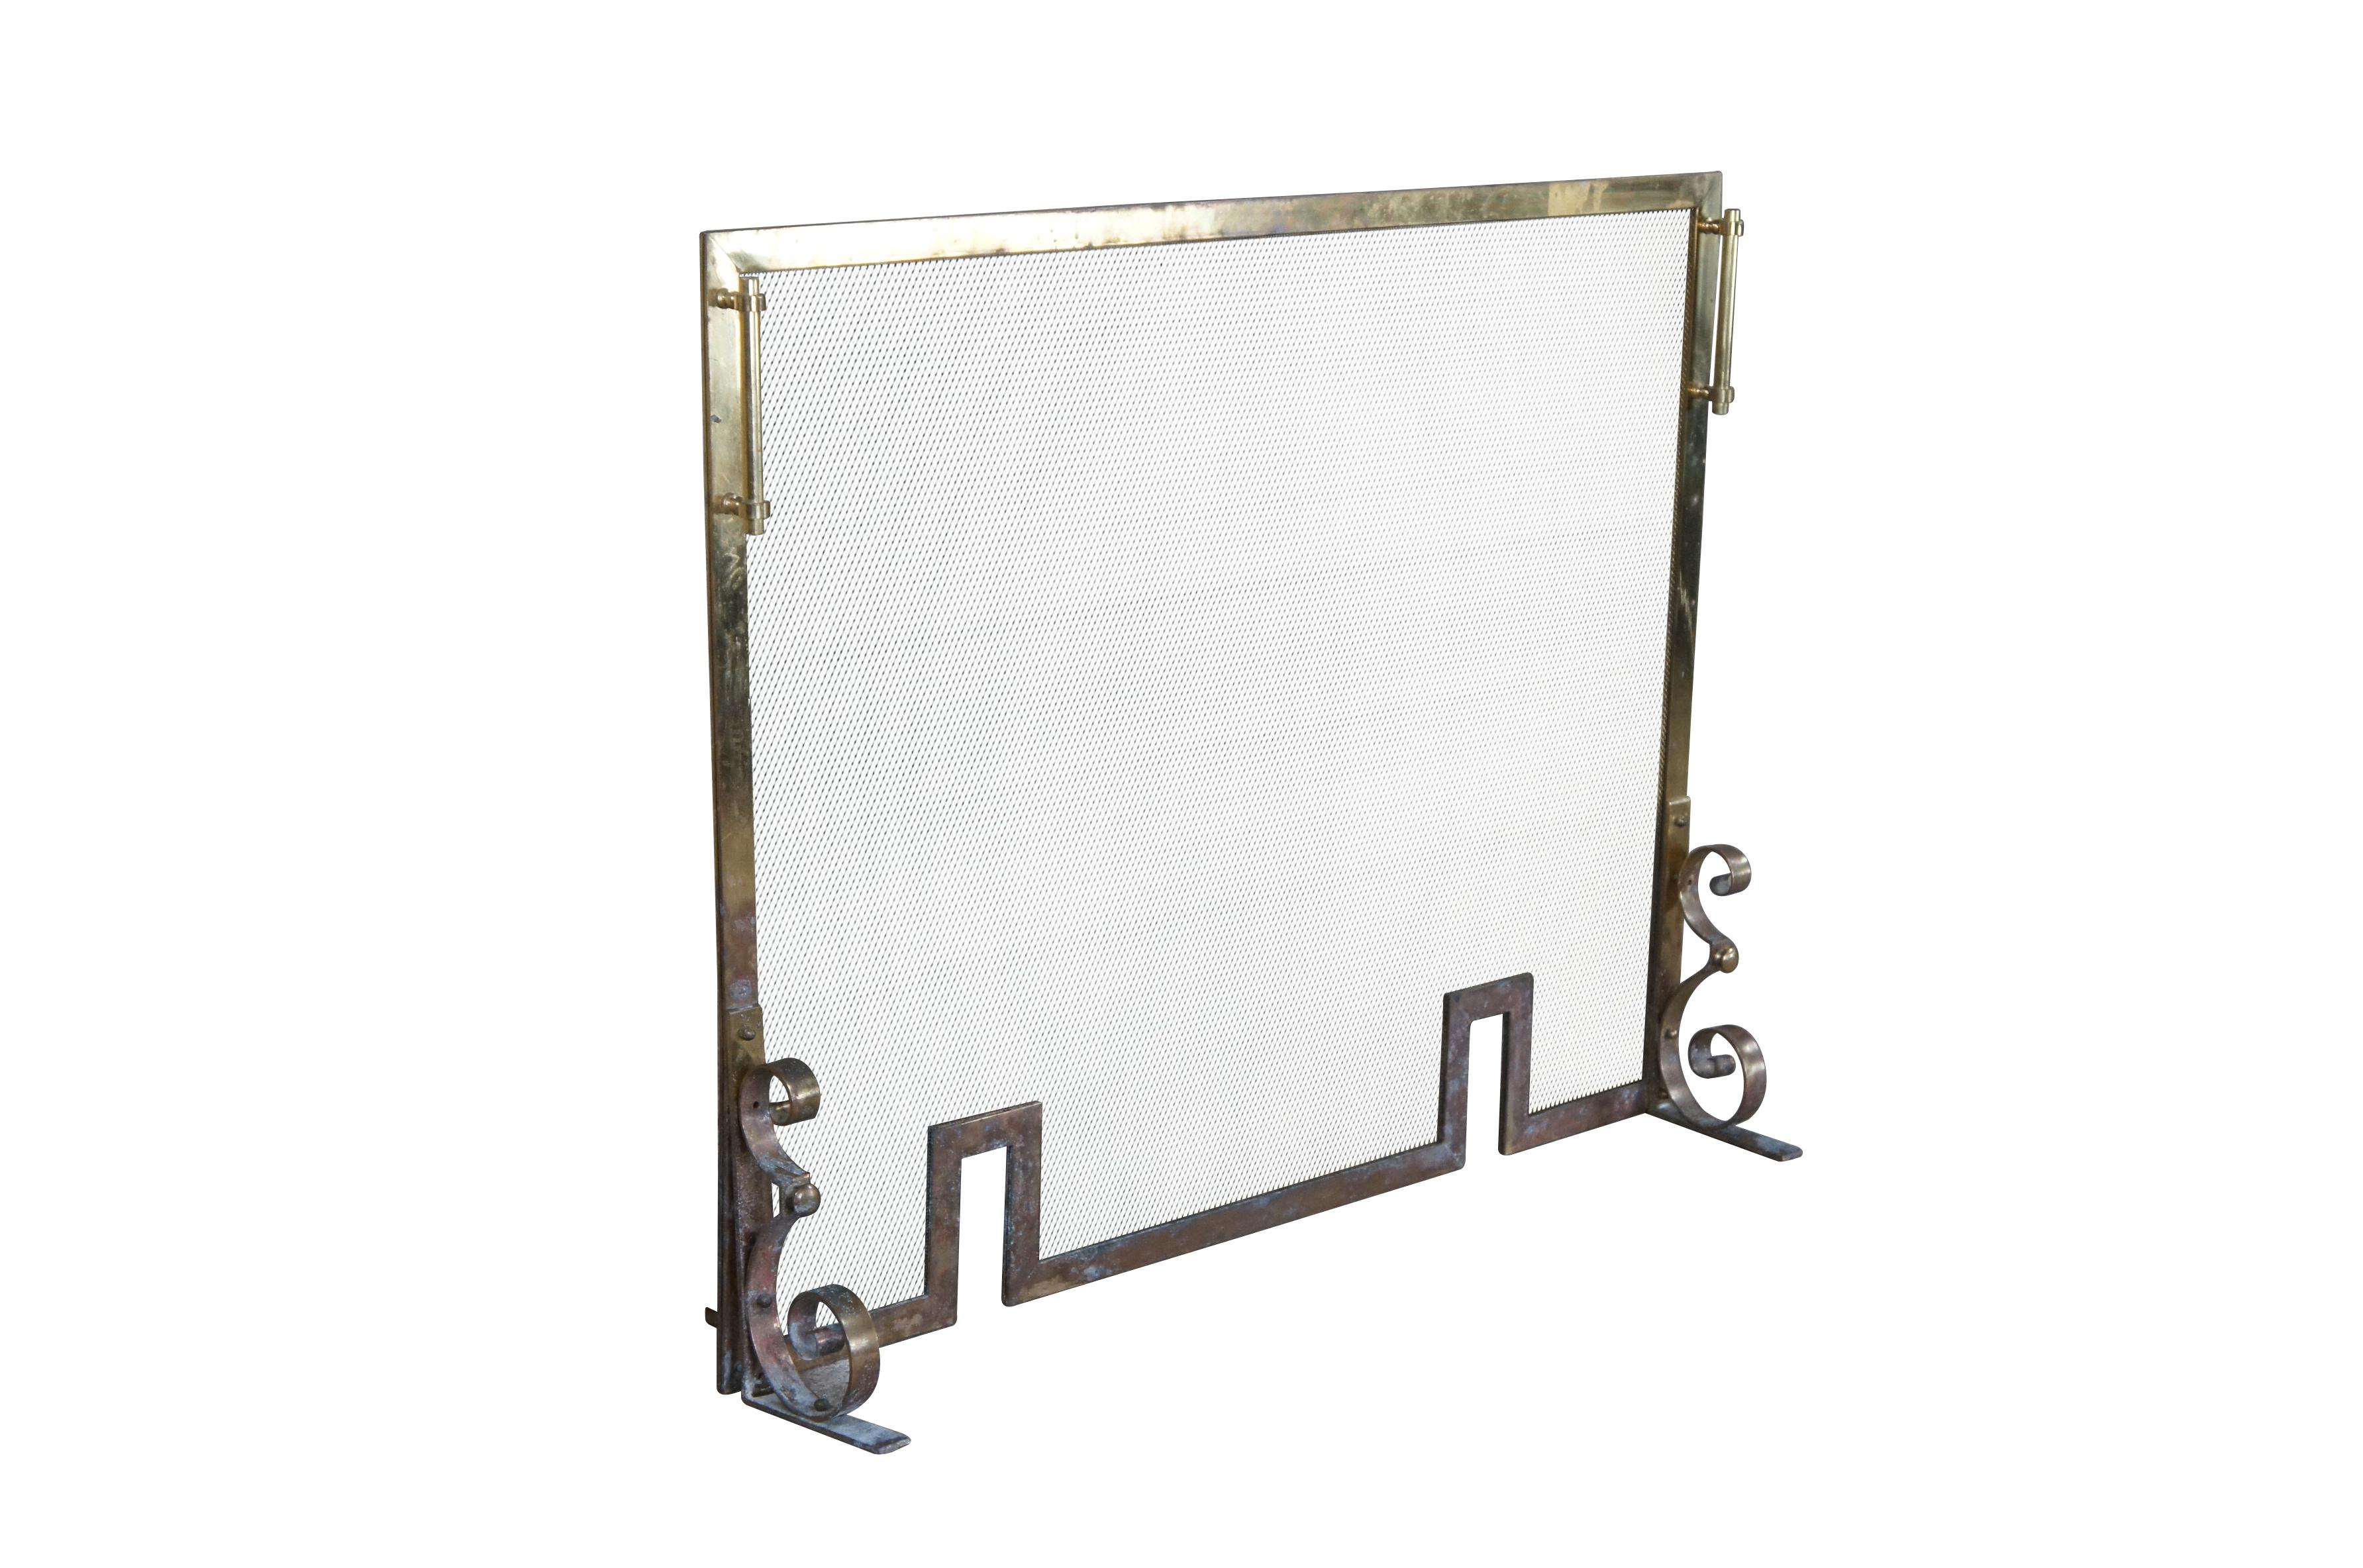 Vintage brass and mesh fire screen featuring Hollywood Regency styling with scrolled brass accents and slots for firedog andirons.

Dimensions:
37